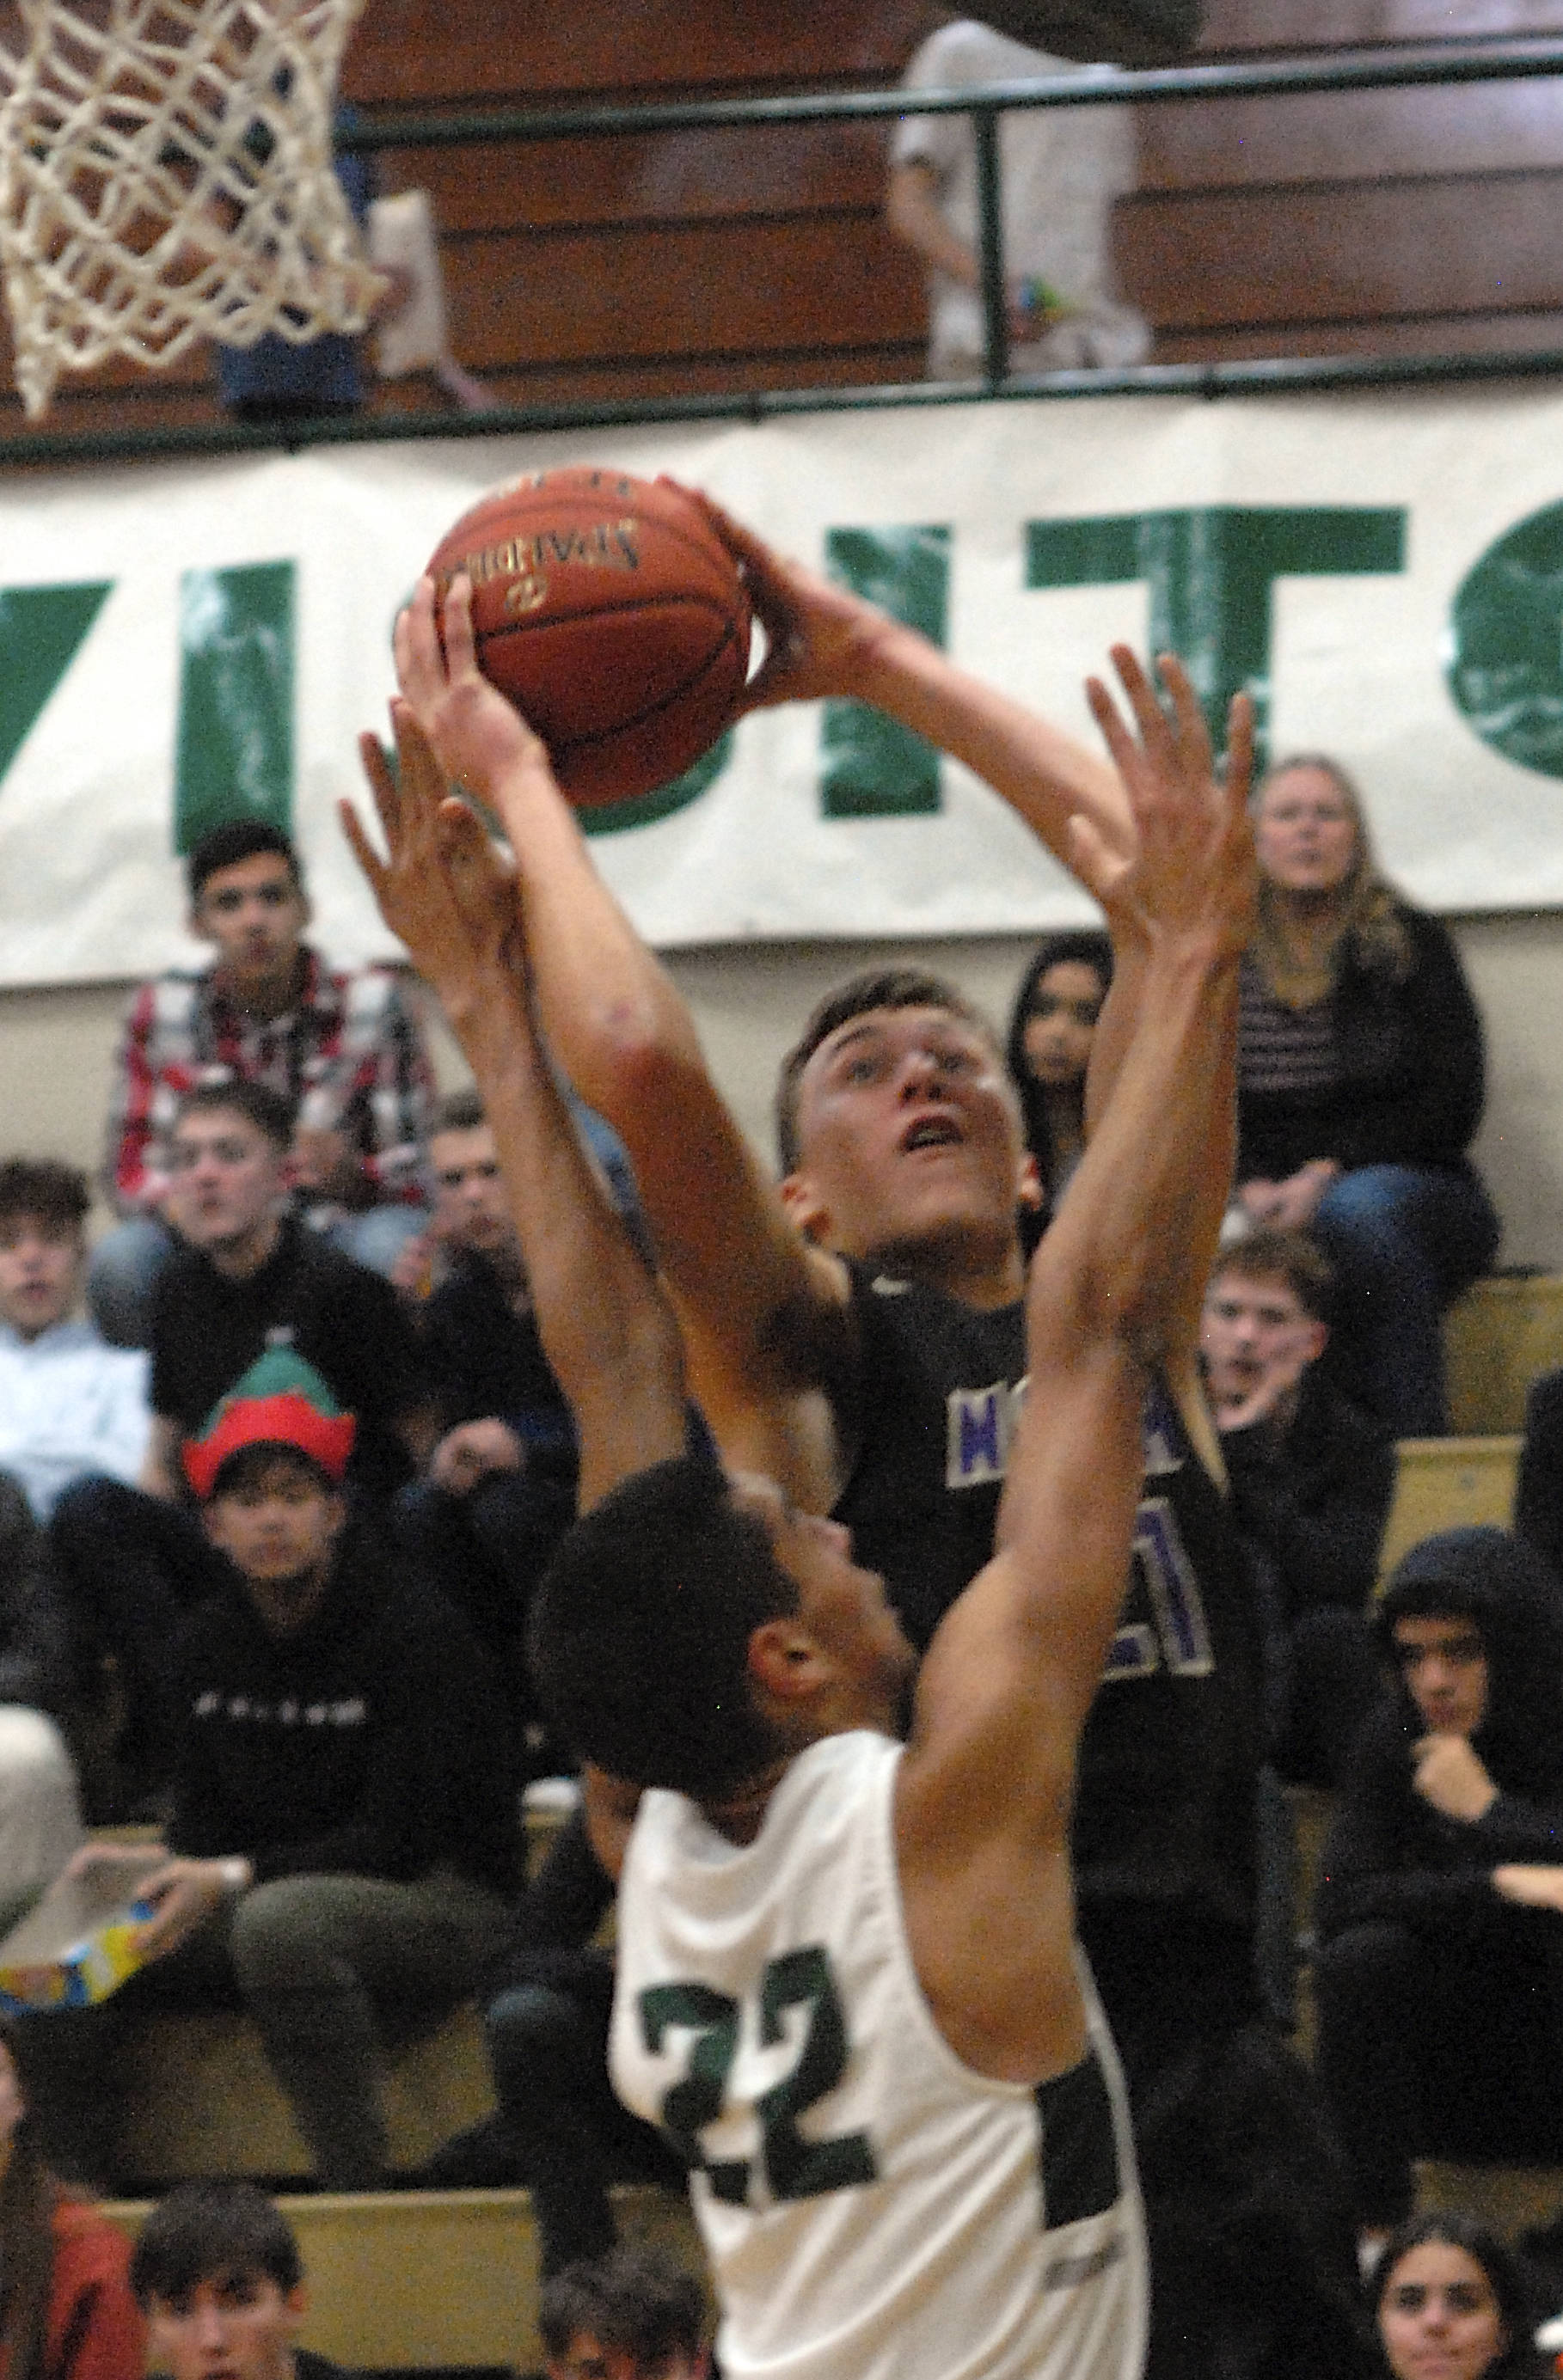 North Kitsap’s Logan Chmielewski aims for the hop over the defense of Port Angeles Damen Ringgold on Wednesday at Port Angeles High School. (Keith Thorpe/Peninsula Daily News)